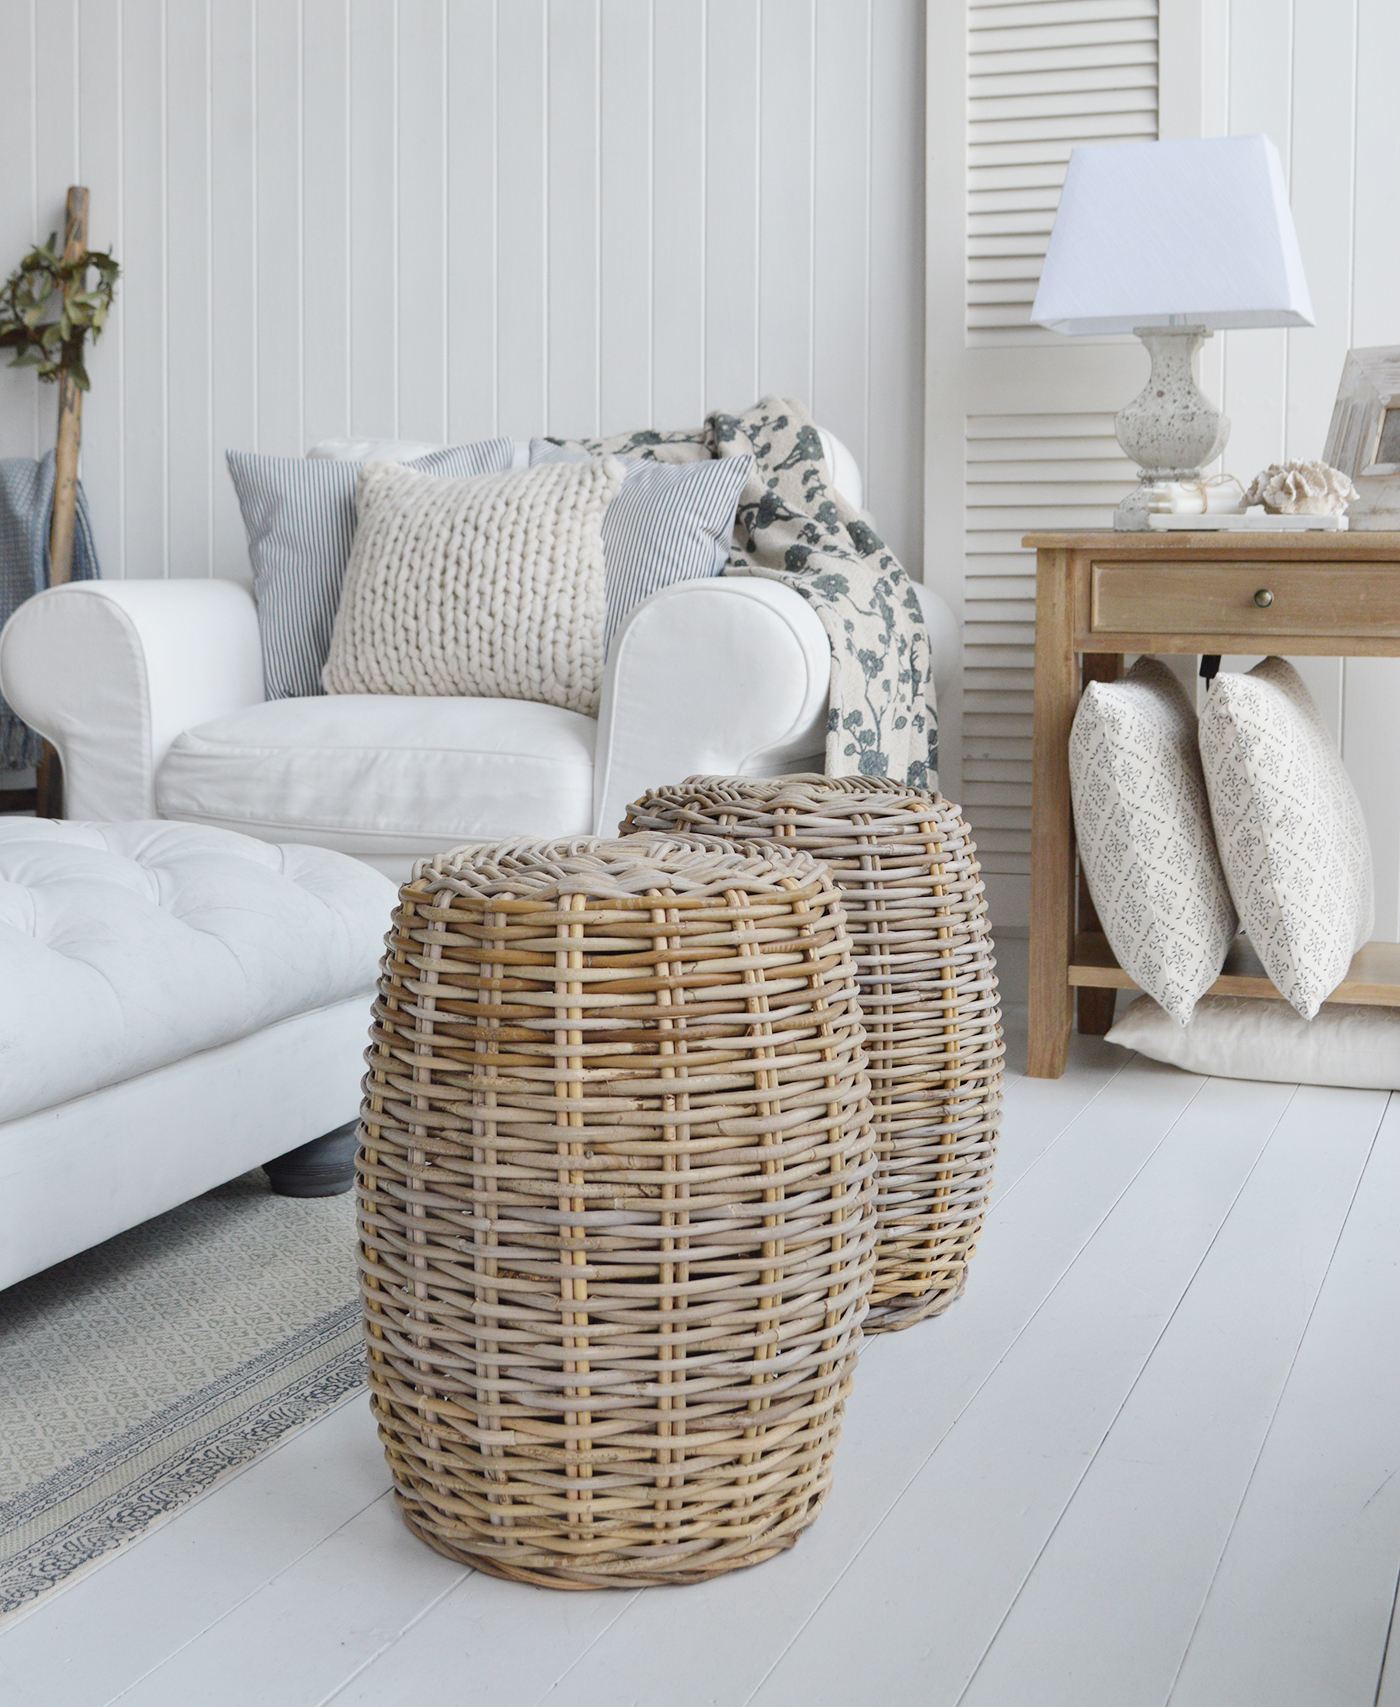 Casco Bay willow stool or seat for New England interiors in all Modern Country, Farmhouse and coastal homes from the White Lighthouse Furniture